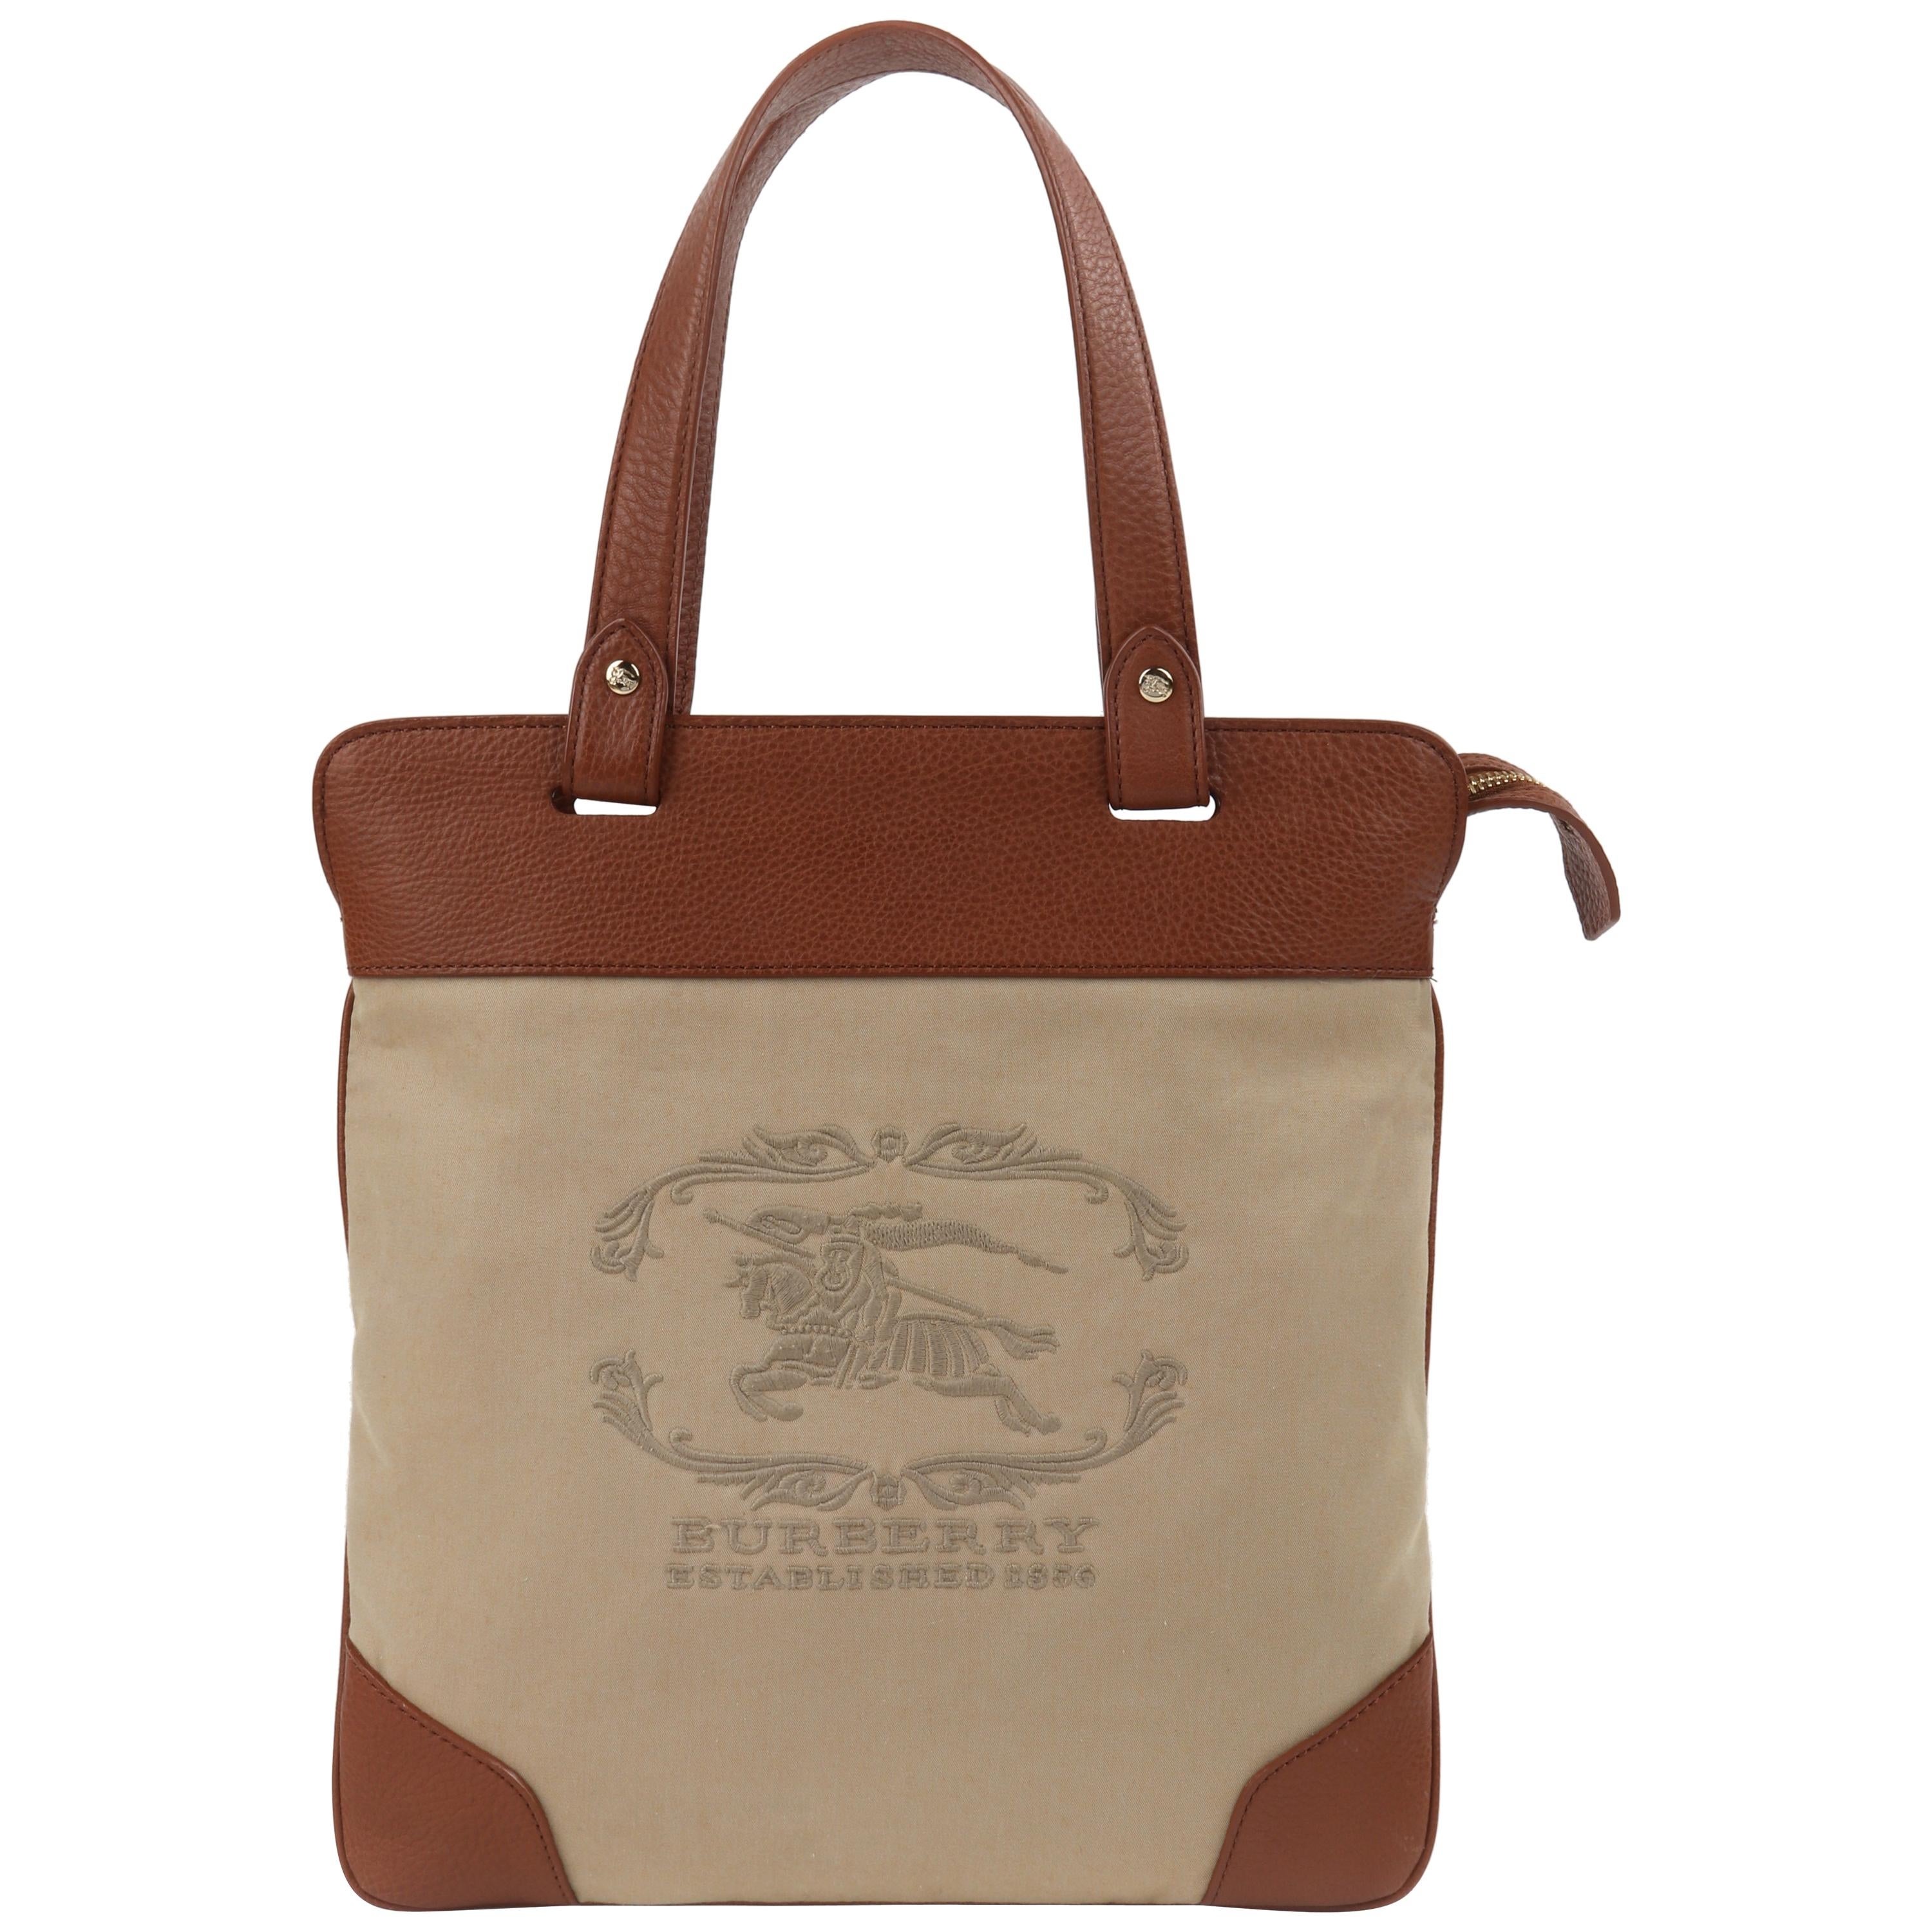 BURBERRY Almond Brown Leather Embroidered Signature Tote Shopper Bag